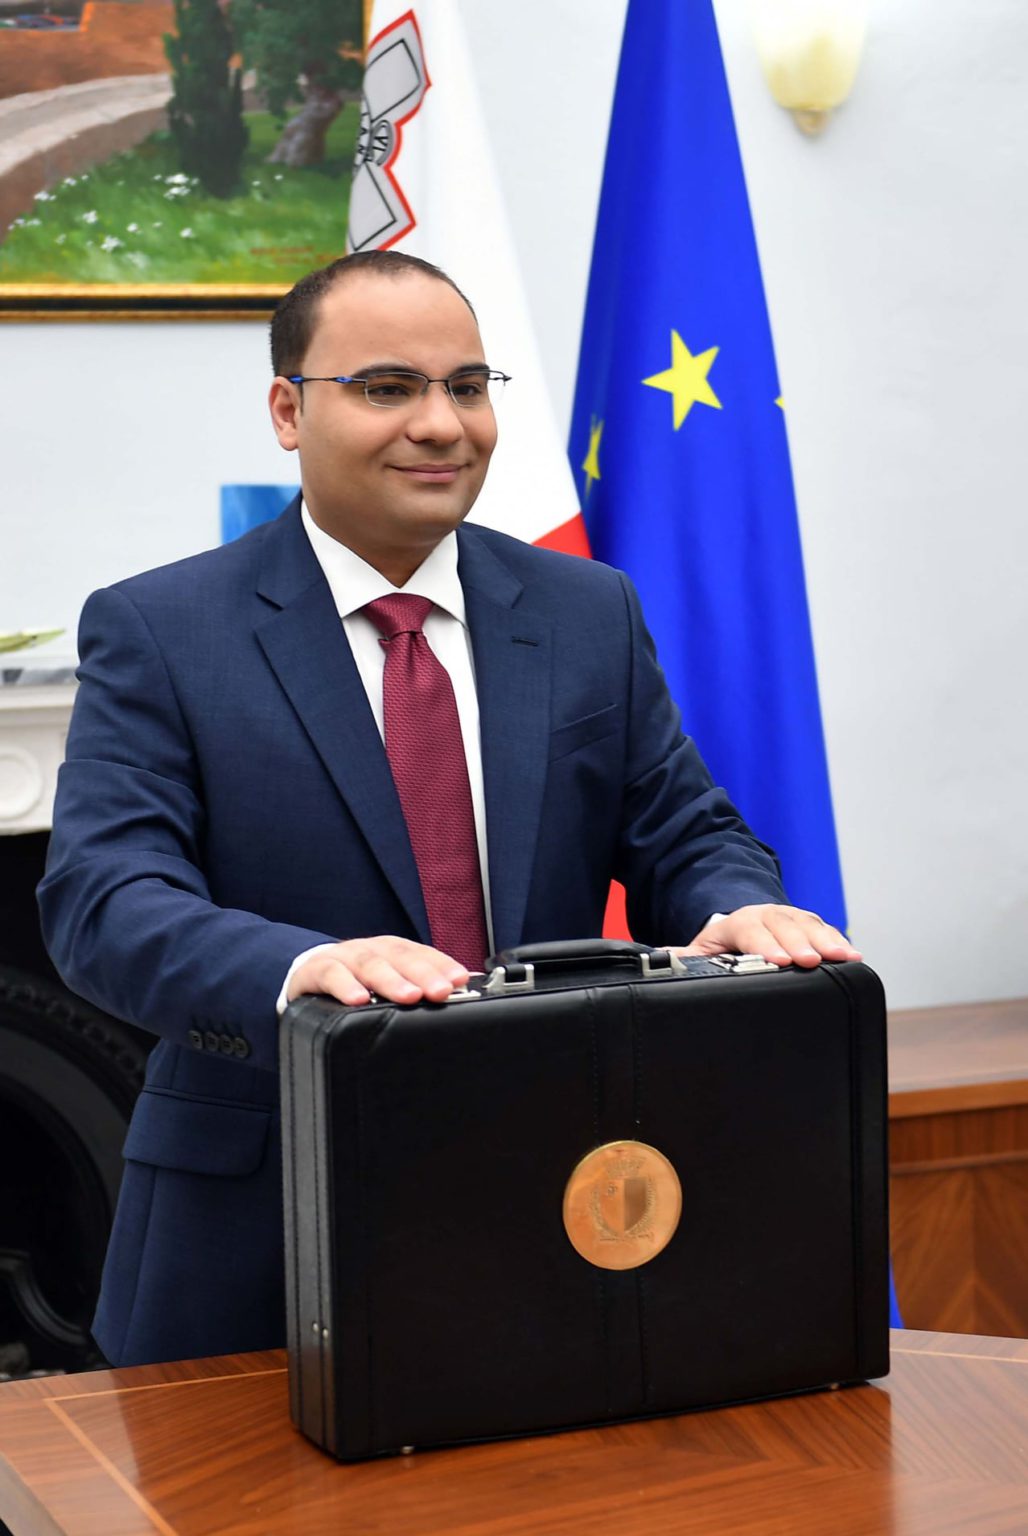 malta-government-grant-for-electric-vehicles-plug-in-hybrids